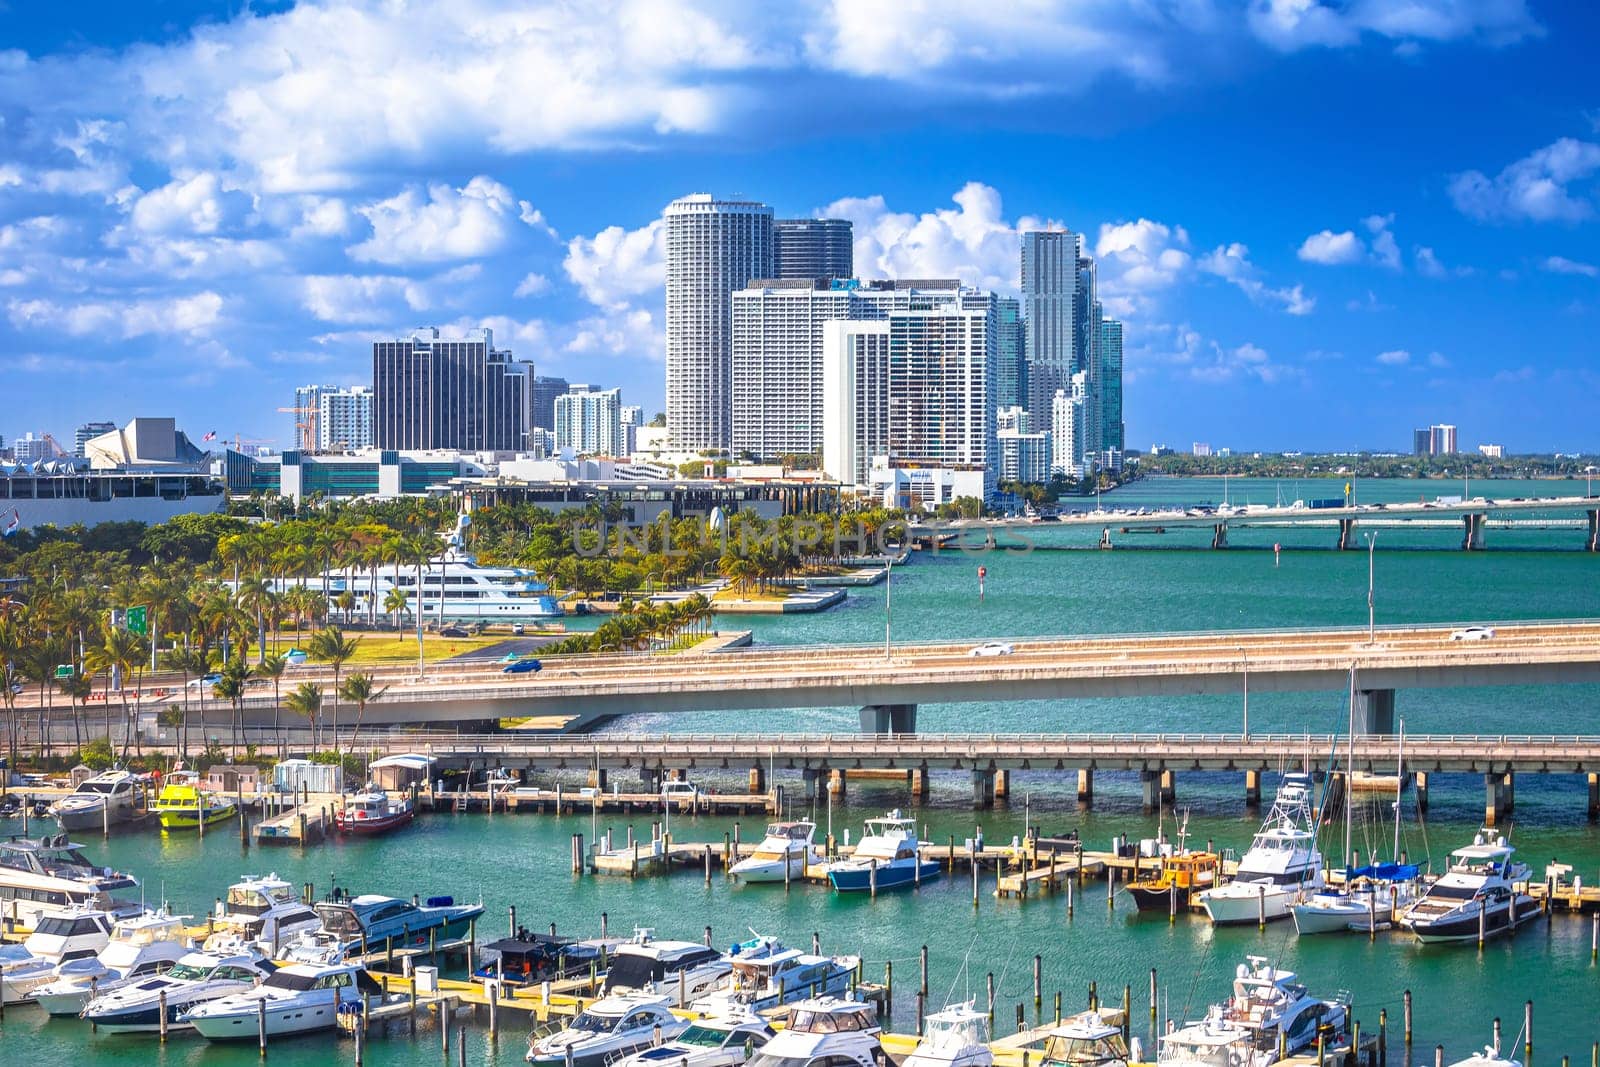 Northern Miami waterfront and skyline panoramic view, Florida state, United States of America